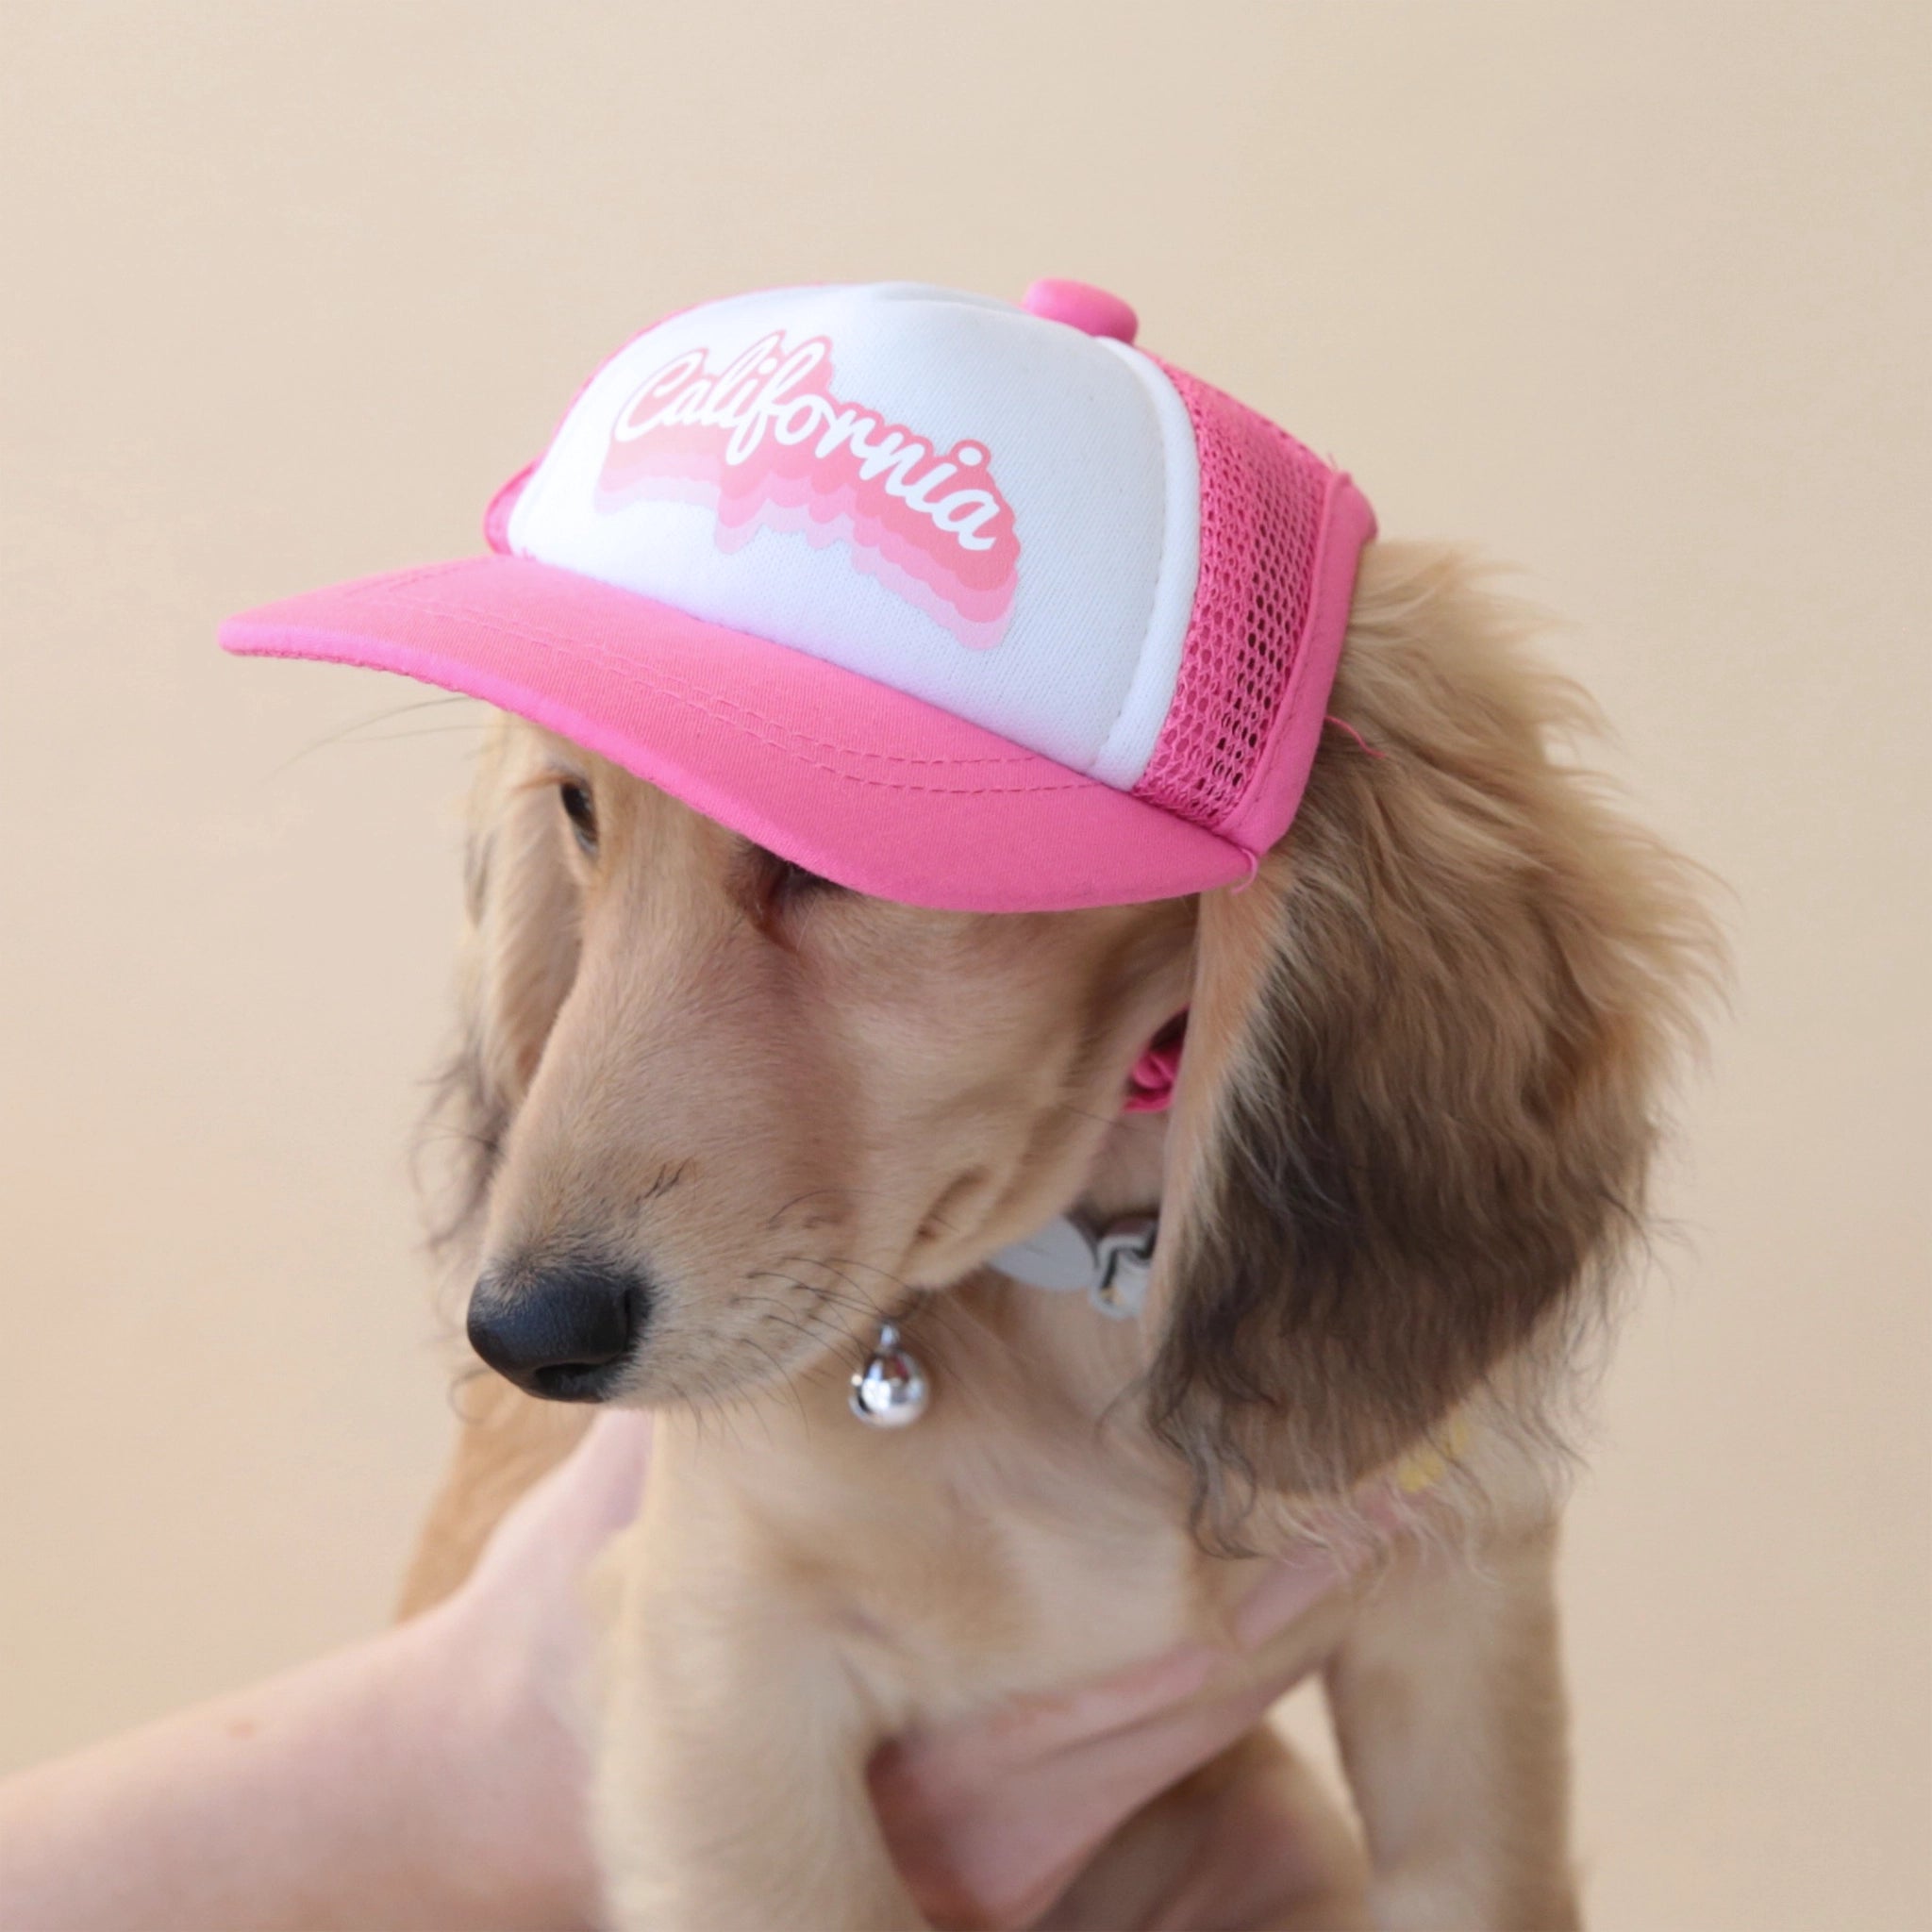 A wiener dog modeling a pink and white baseball hat with a white hat, and a pink bill and mesh backing along with pink outlined text that reads, "California" on the front.